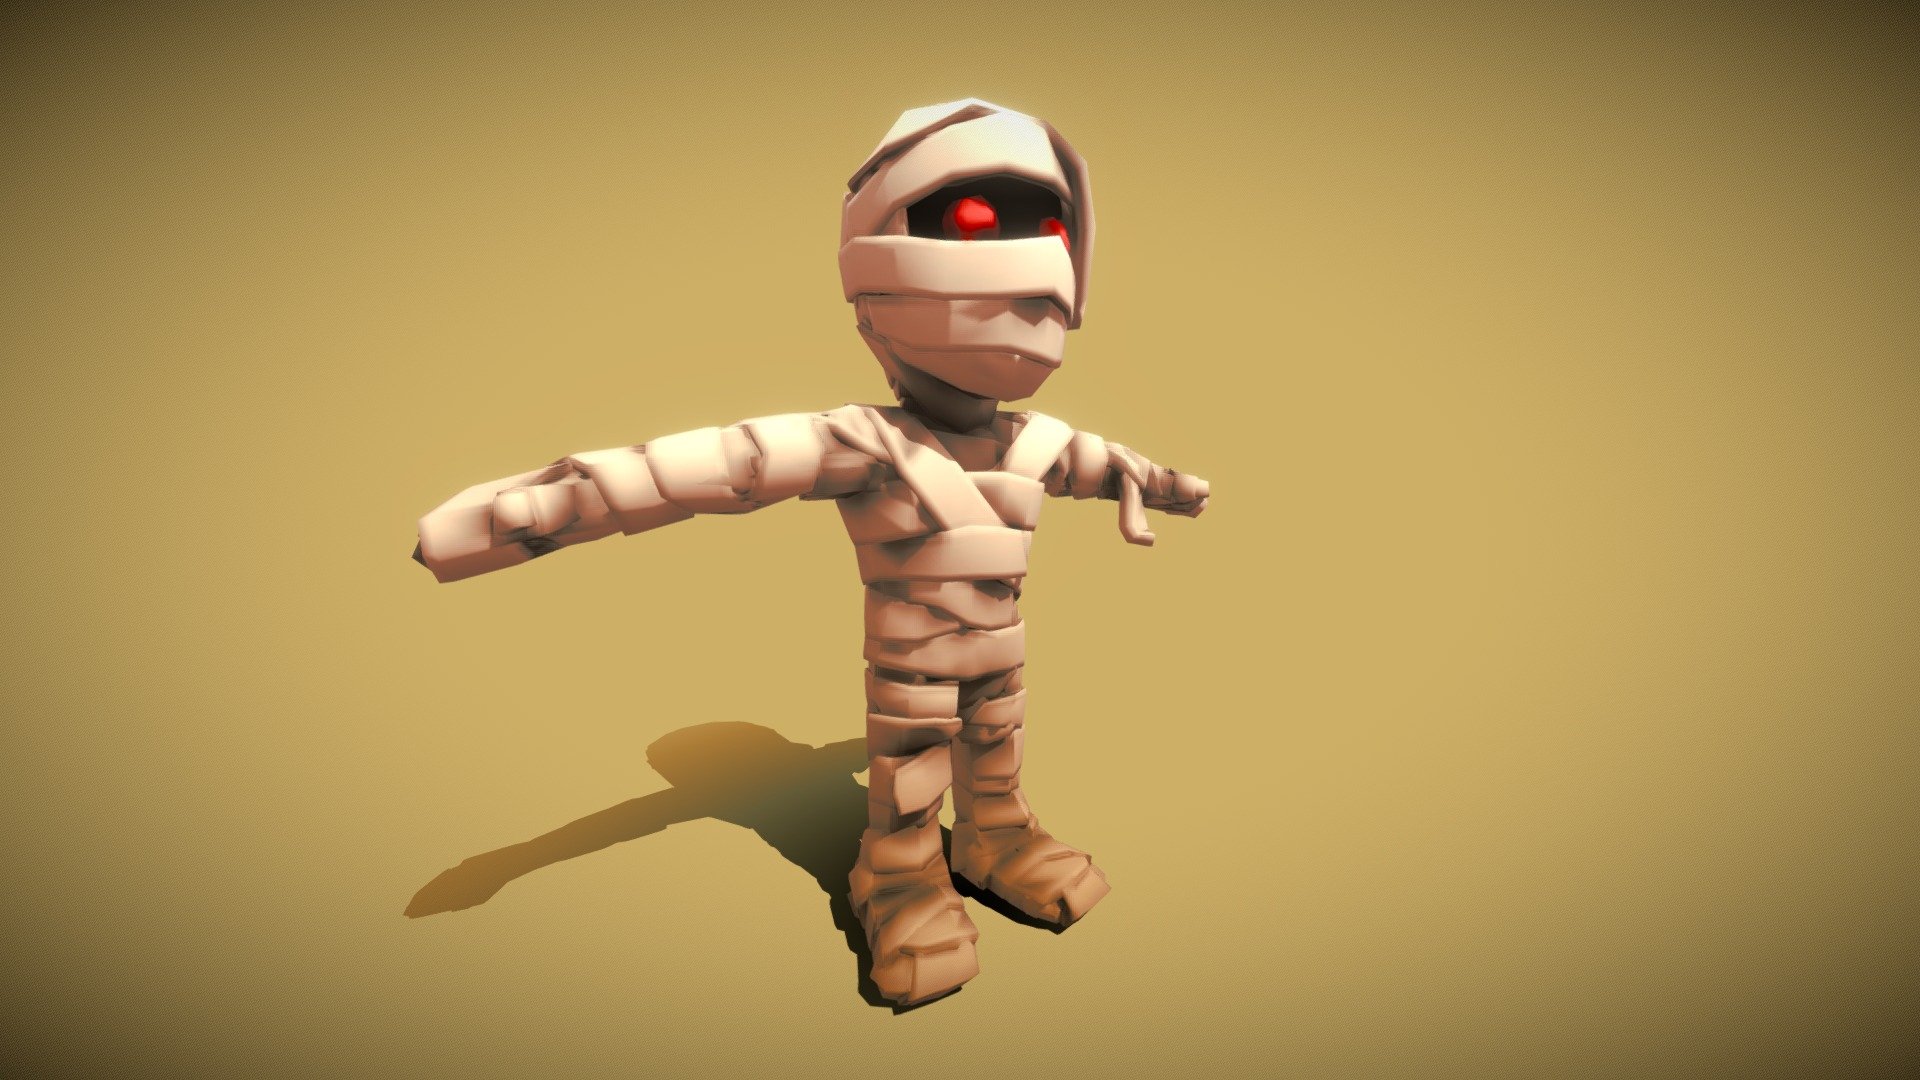 Low Poly Cartoon Mummy.

The Texture is only a Gradient image.

Number of Vertex: 8.907

Number of Faces: 9.057

Number of Triangles: 17.560 - Low Poly Cartoon Mummy - Buy Royalty Free 3D model by Toon Goo (@toongoo) 3d model